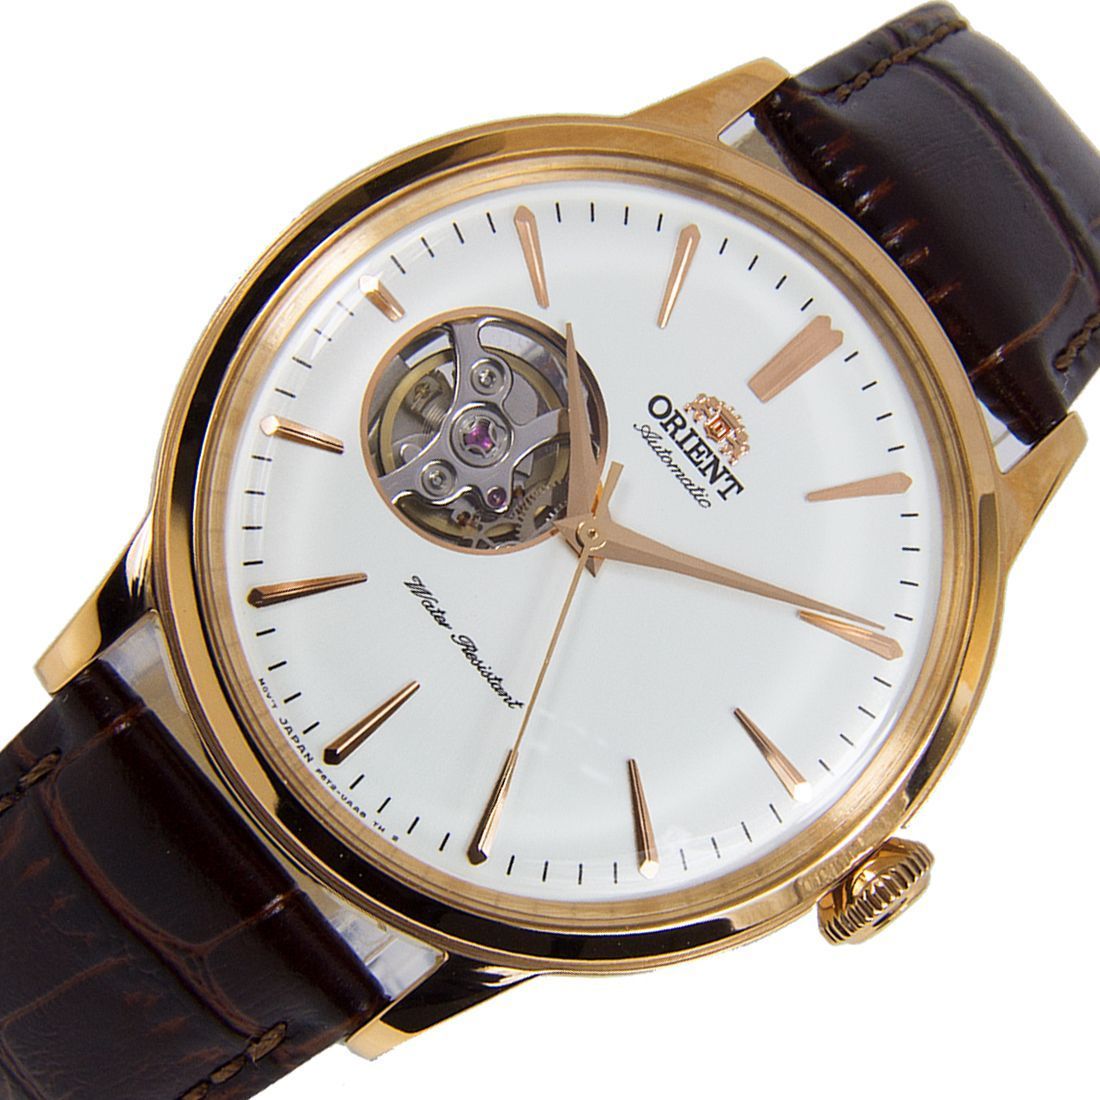 Orient Semi Skeleton Mechanical RA-AG0003S RA-AG0003S10B Mens Leather Watch -Orient